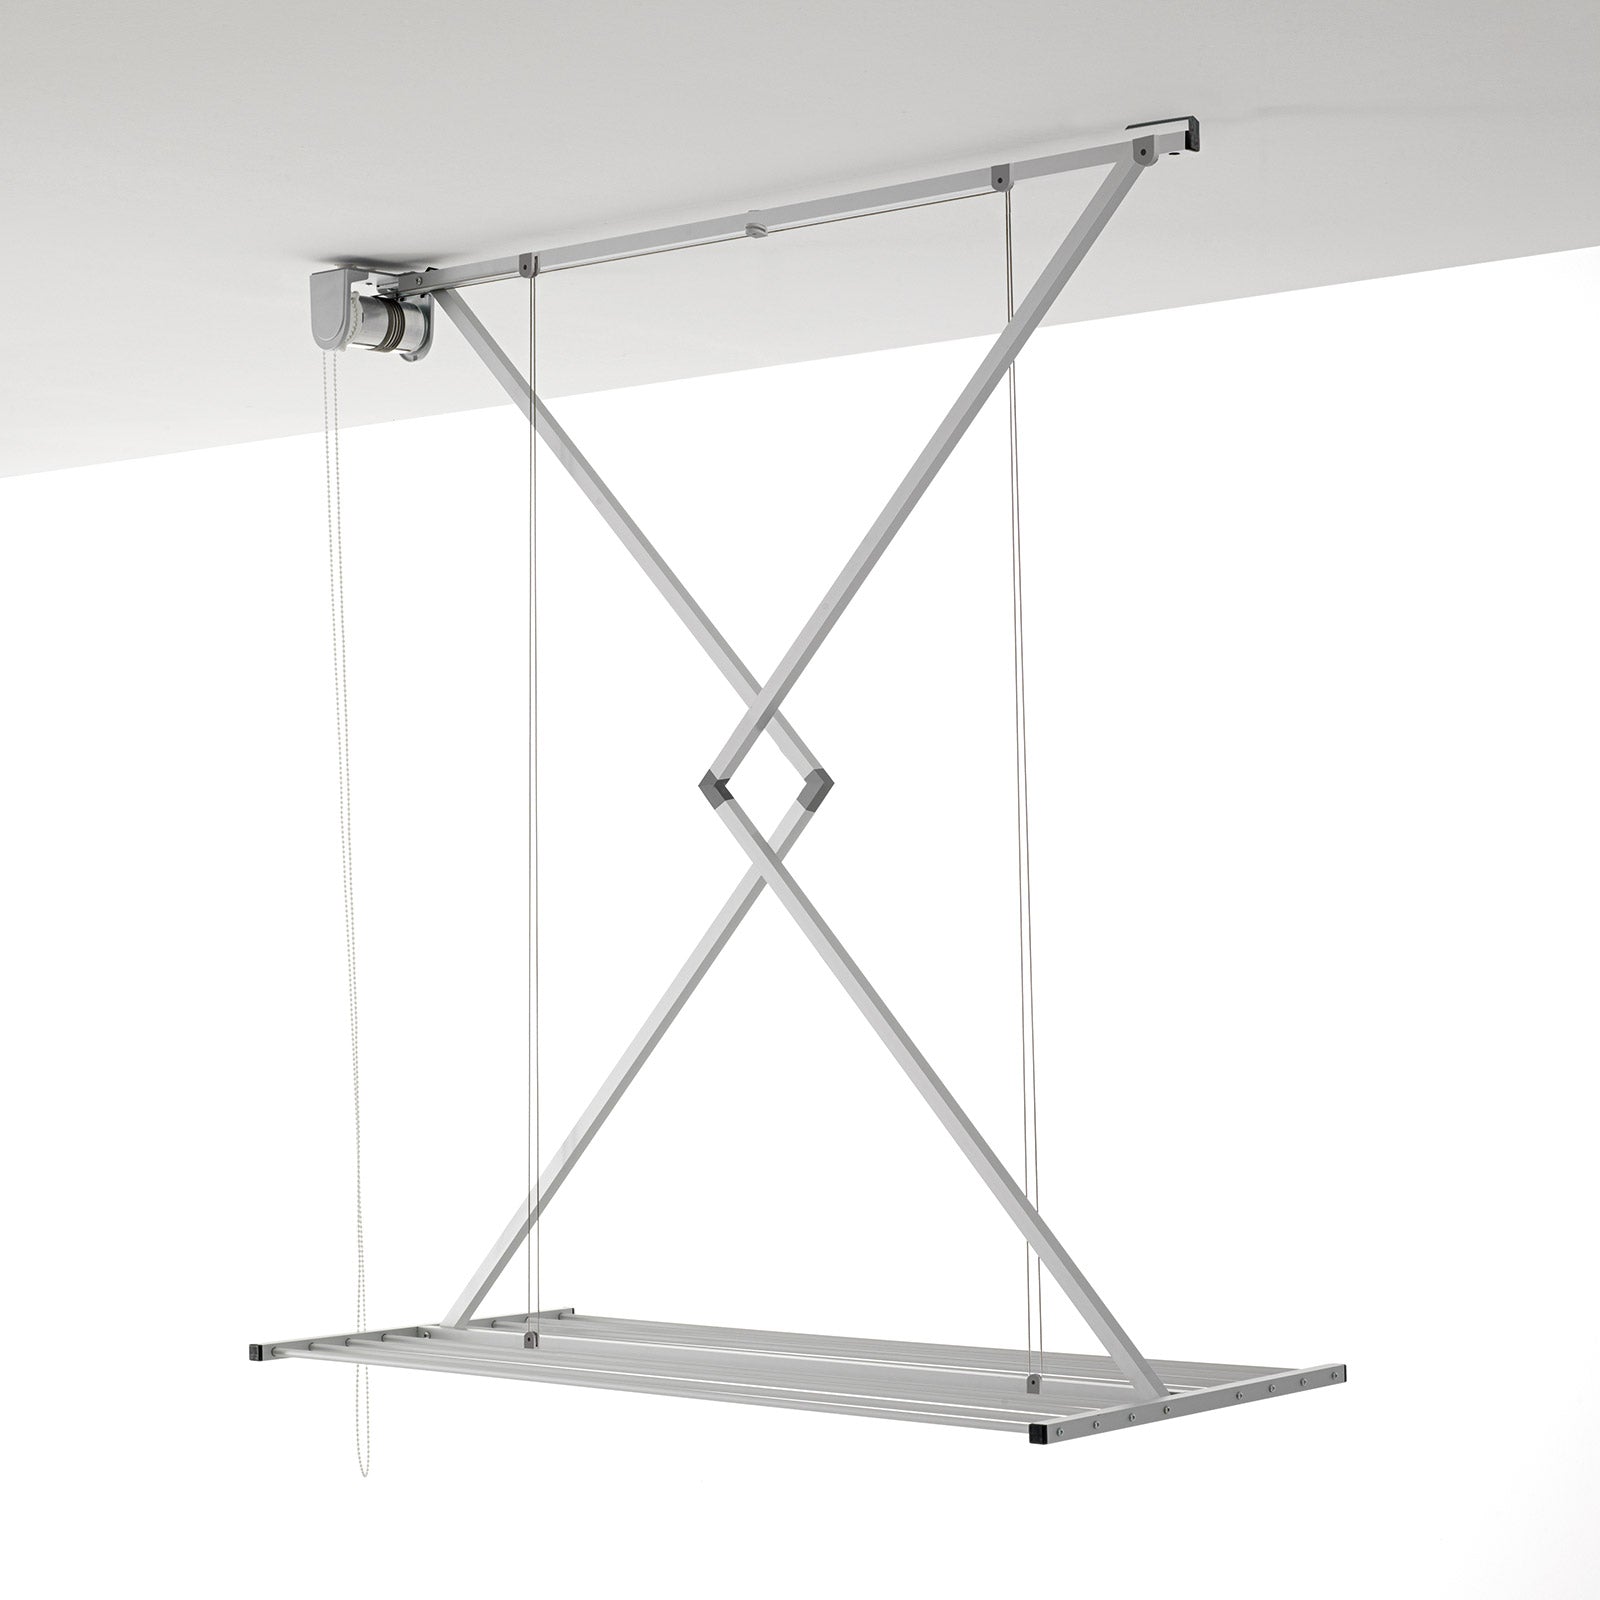 Foxydry Mini 120 Ceiling-Mounted Drying Rack Manual Clothes